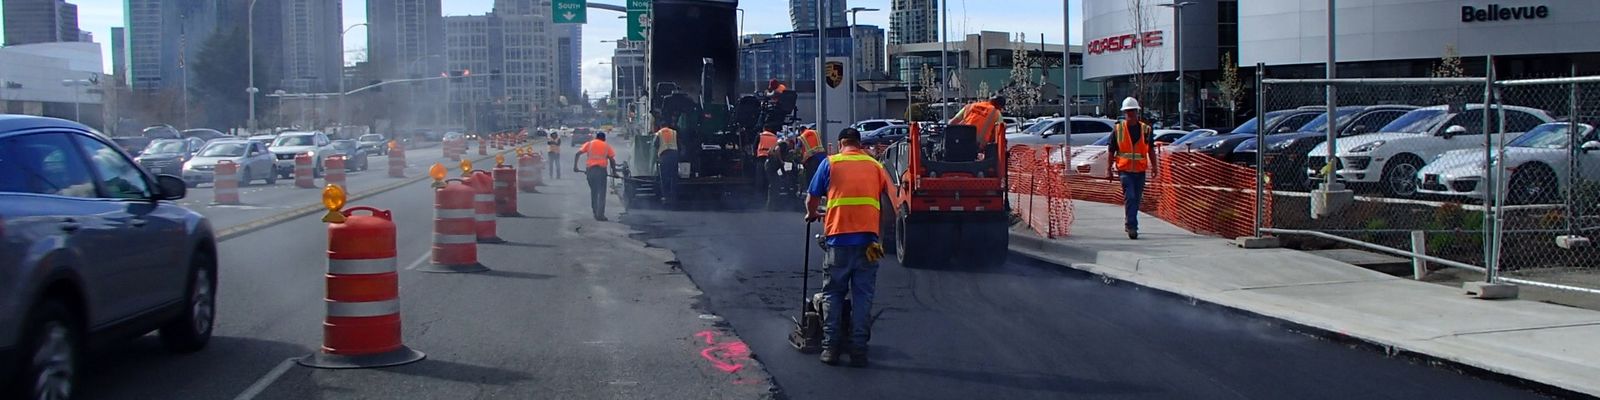 Image of crew repaving street with new asphalt -- downtown skyline in background